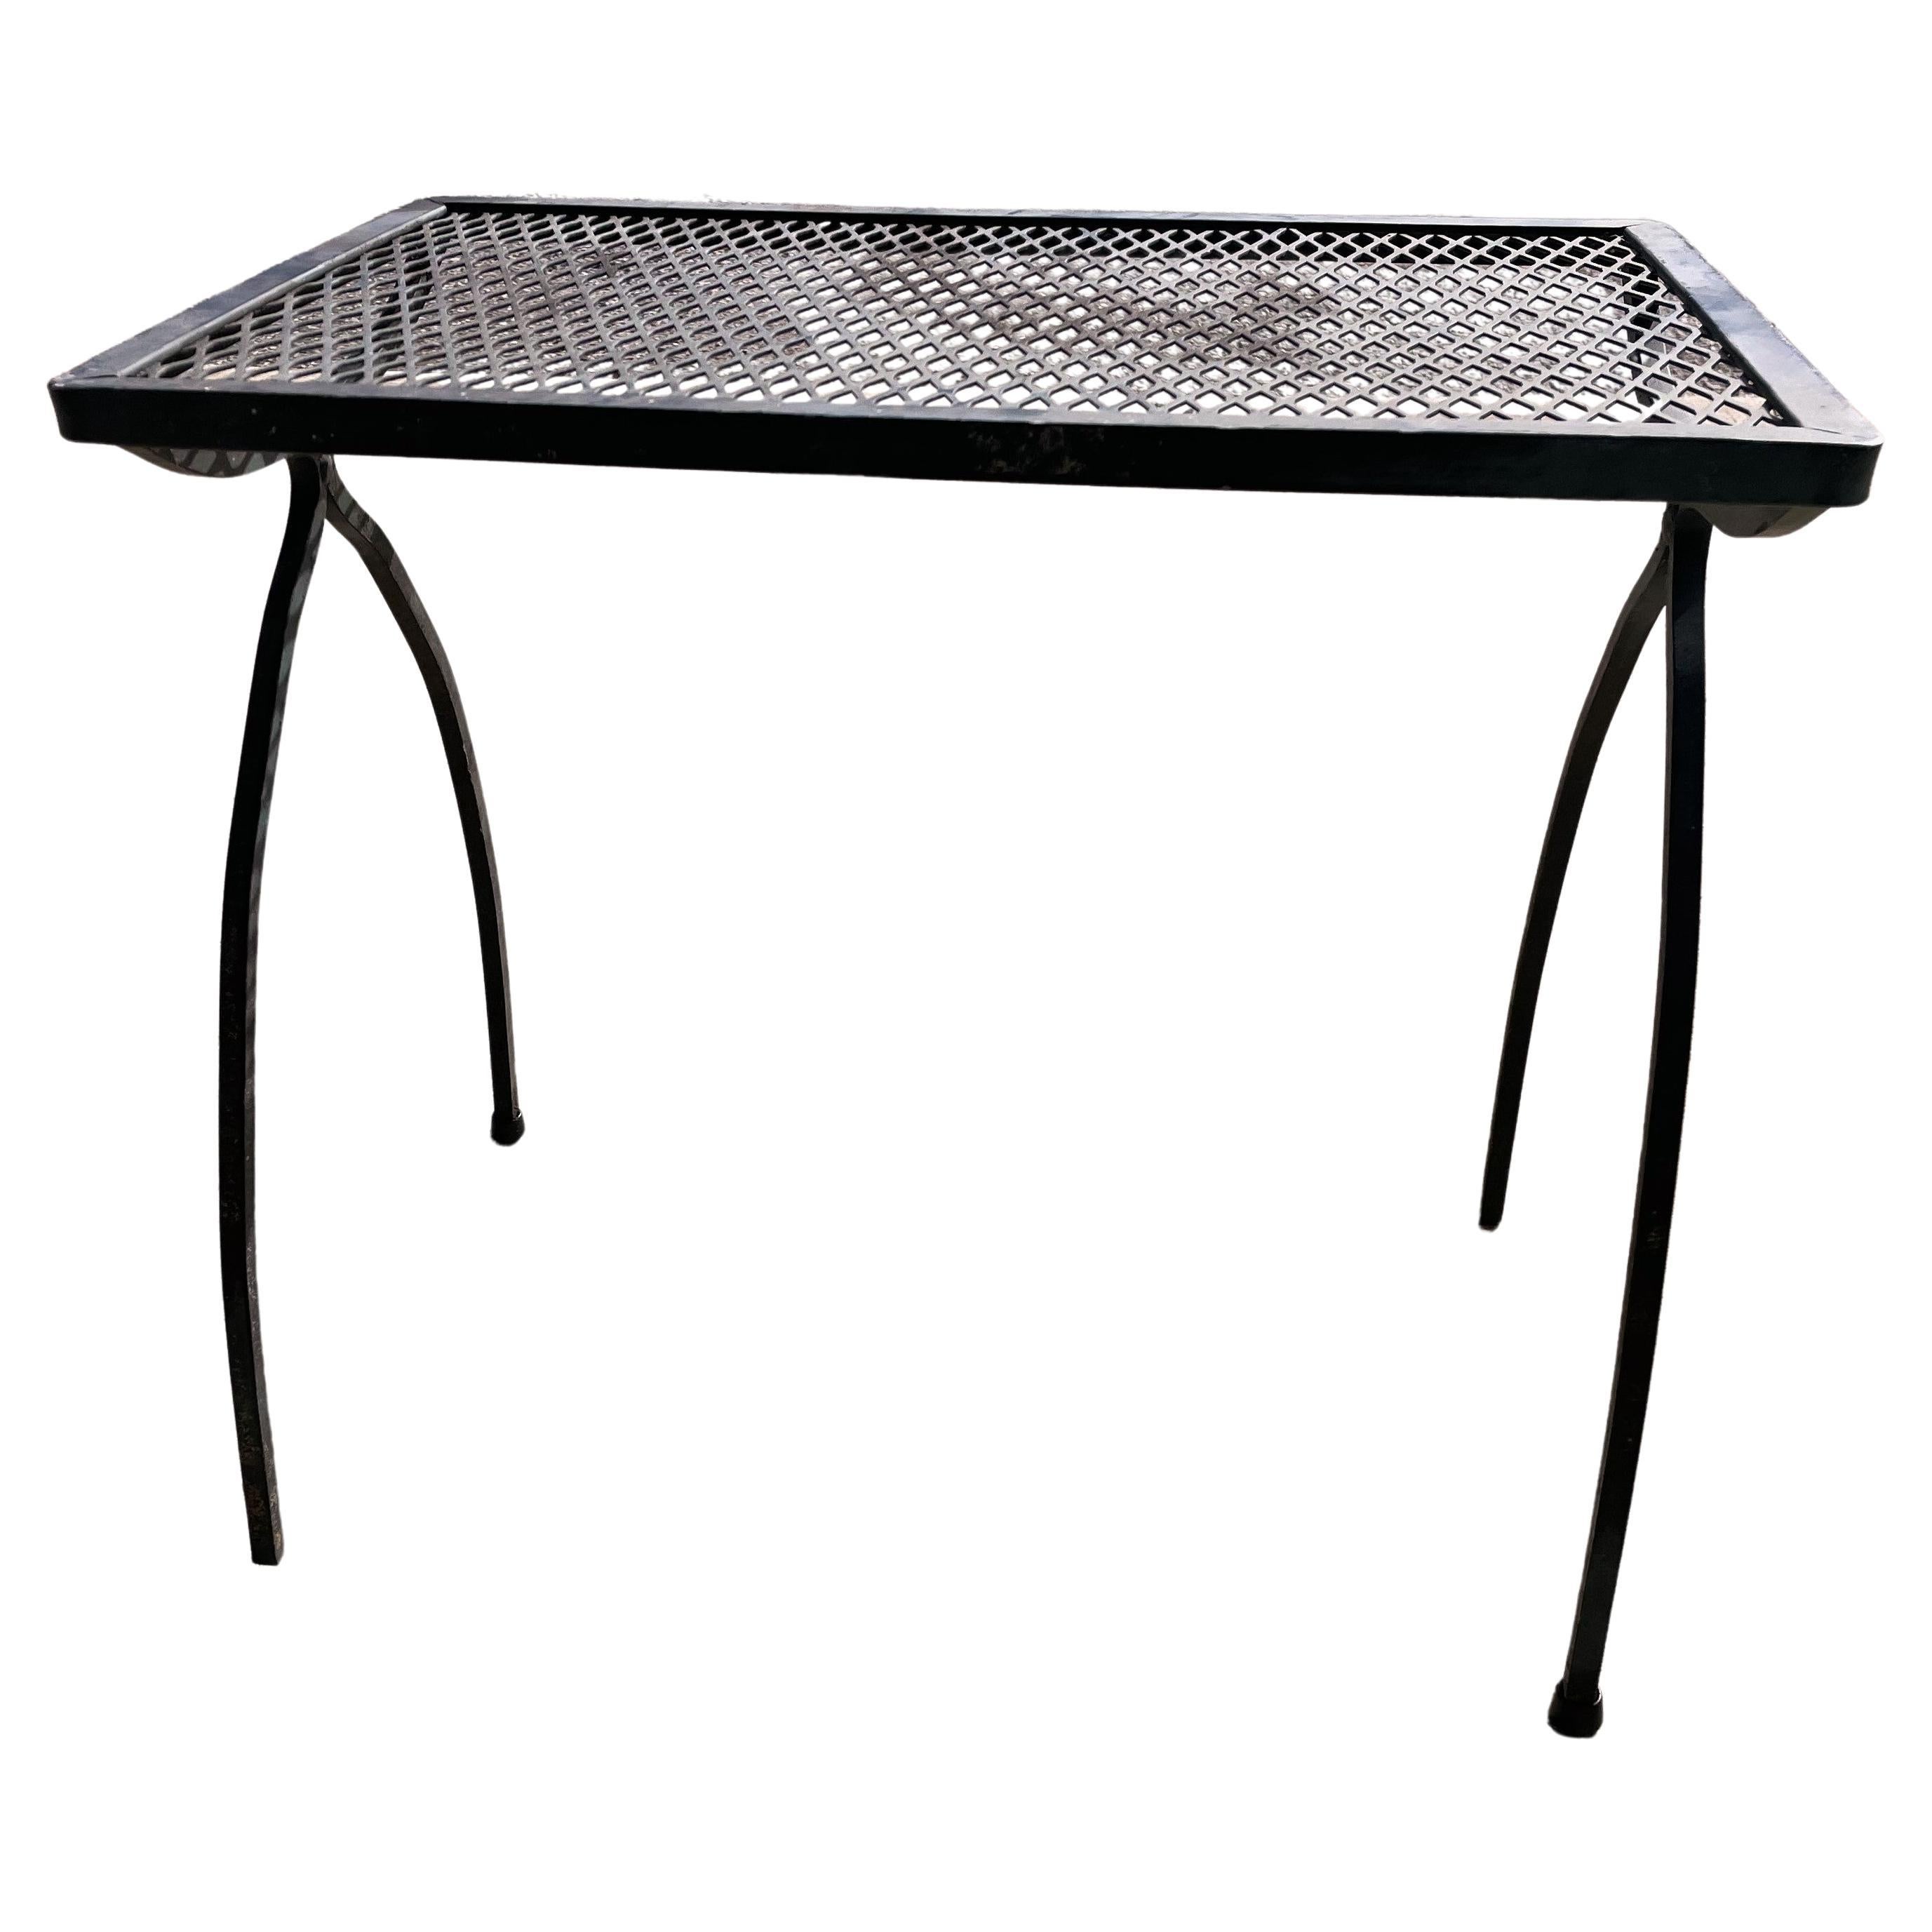 Wrought Iron Single Table from a Nesting Set Salterini Style Mesh Top